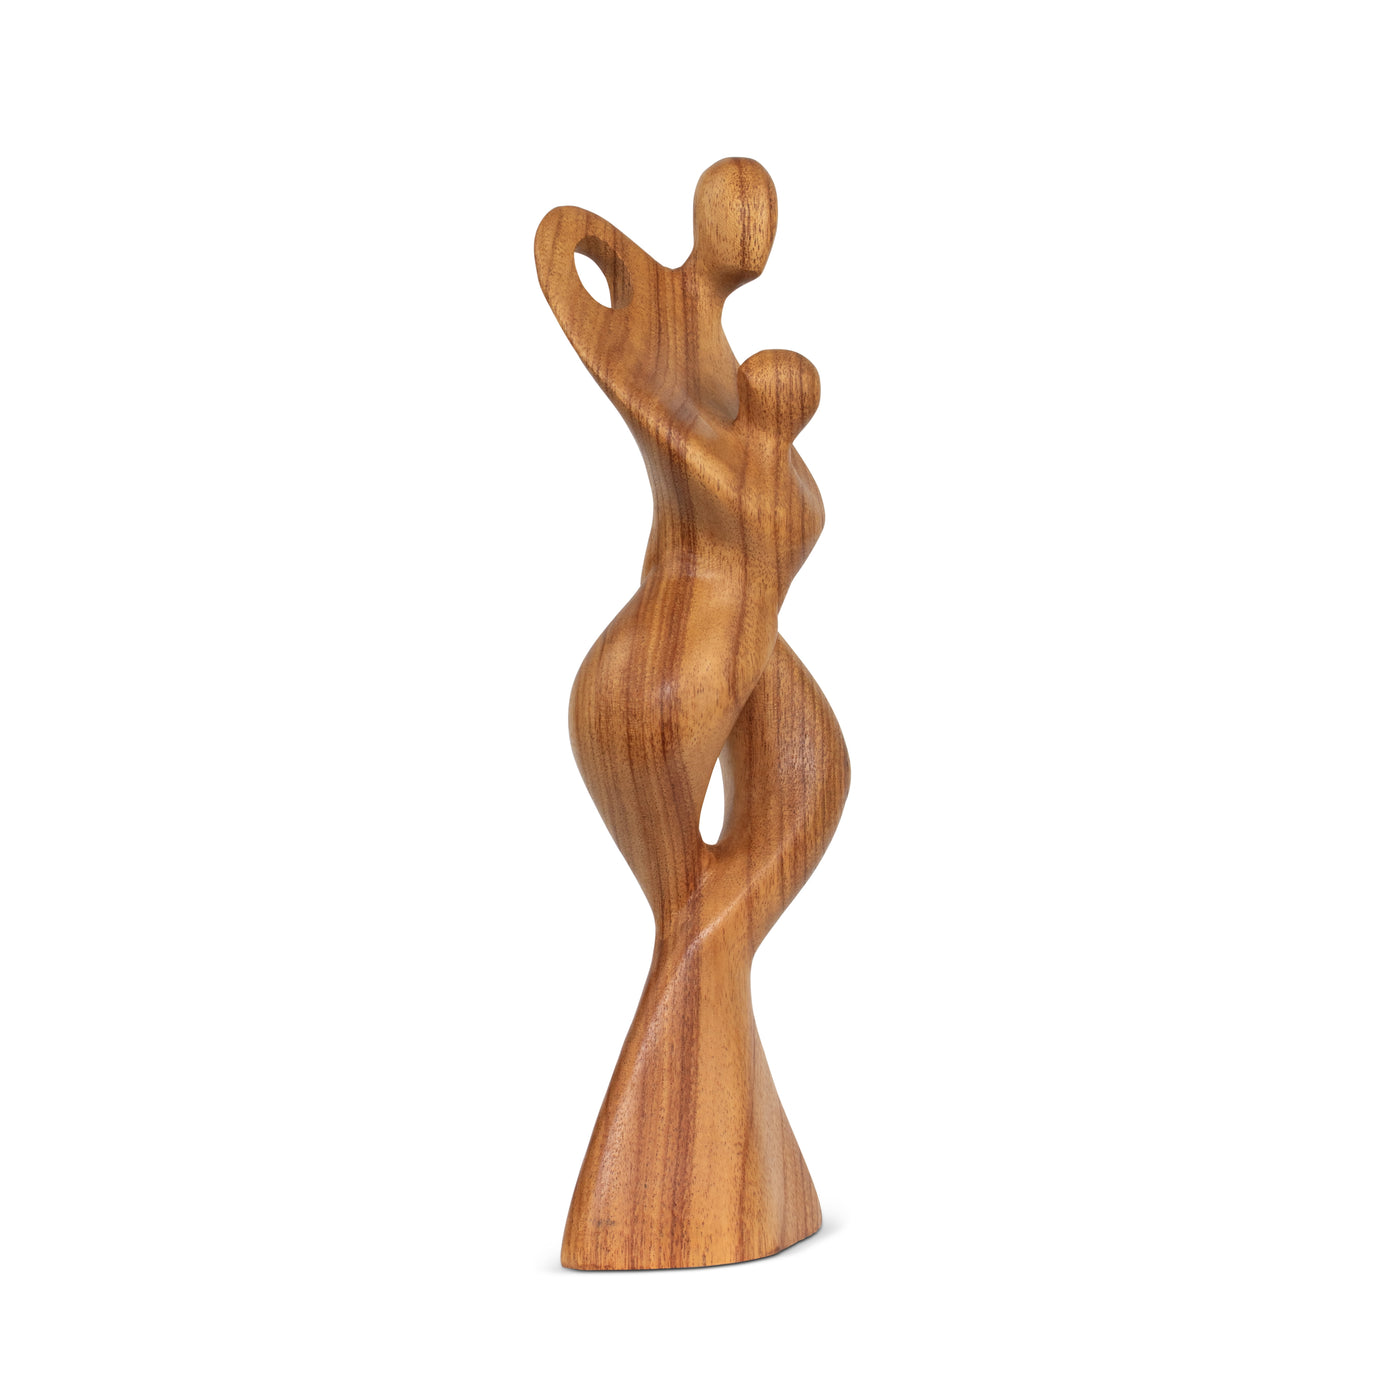 14" Wooden Handmade Abstract Sculpture Statue Handcrafted "Dance with Me" Gift Decorative Home Decor Figurine Accent Decoration Artwork Hand Carved